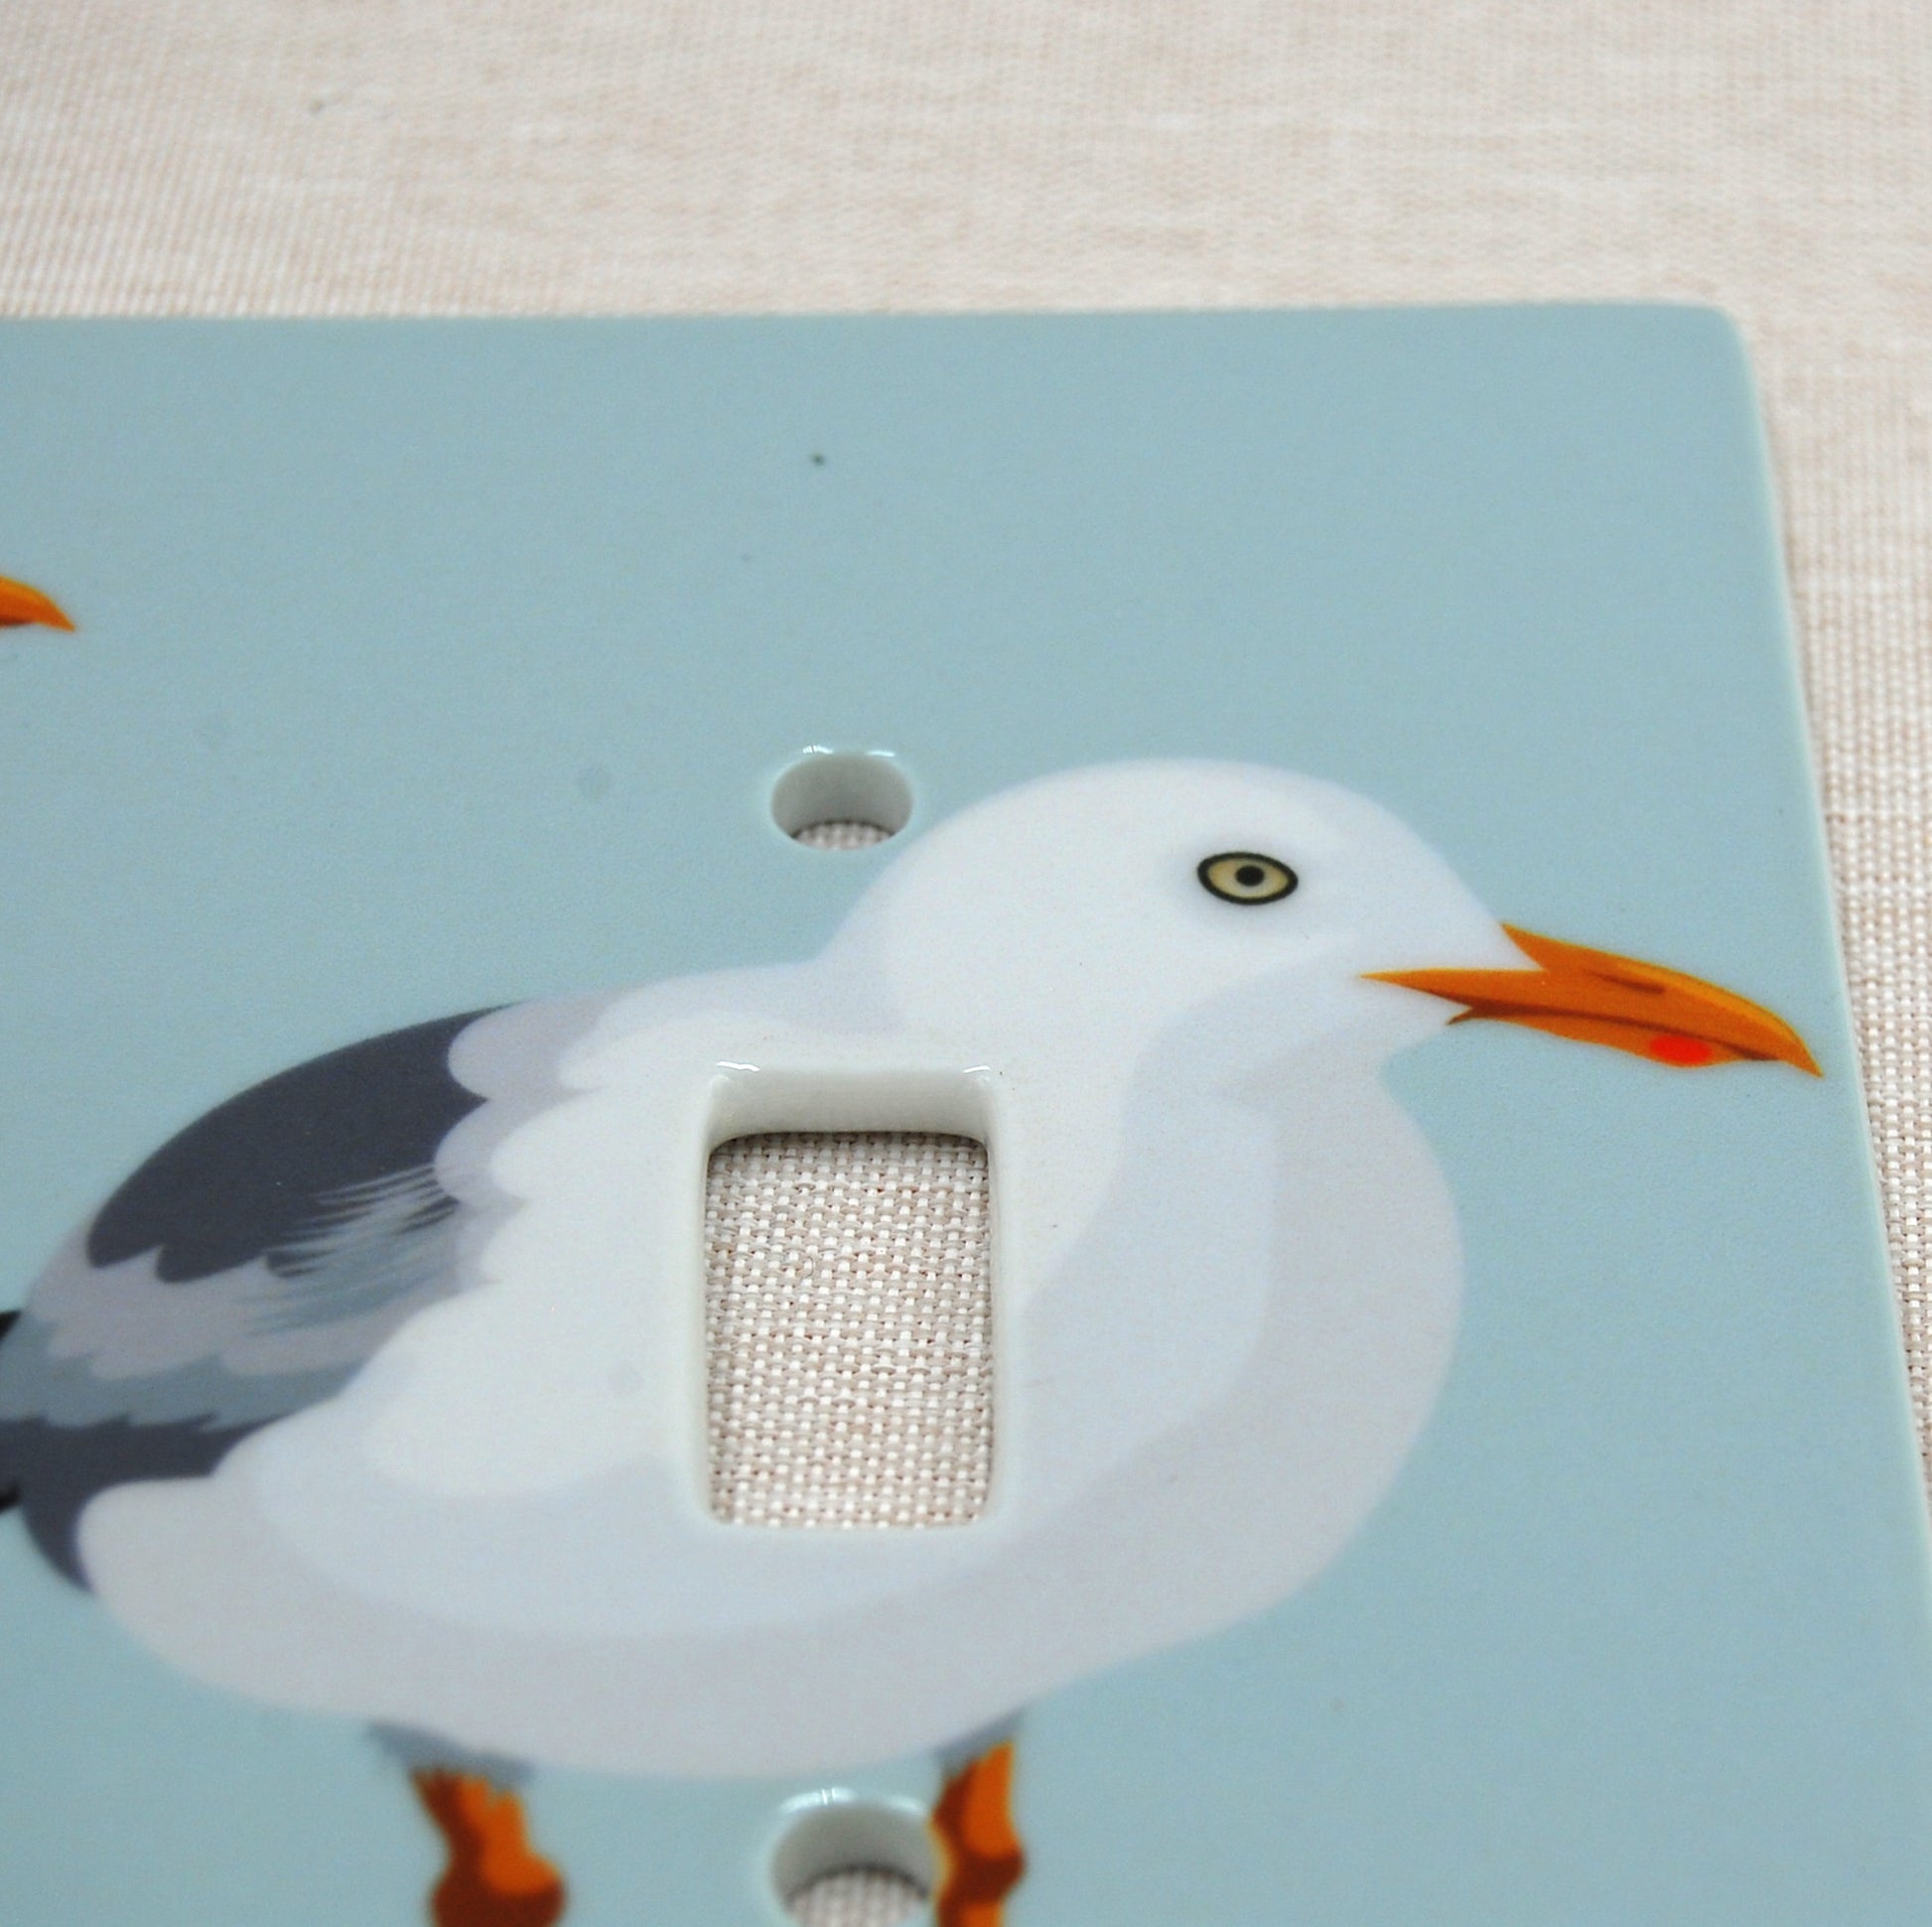 Detail shot of the Seagulls switch plate.